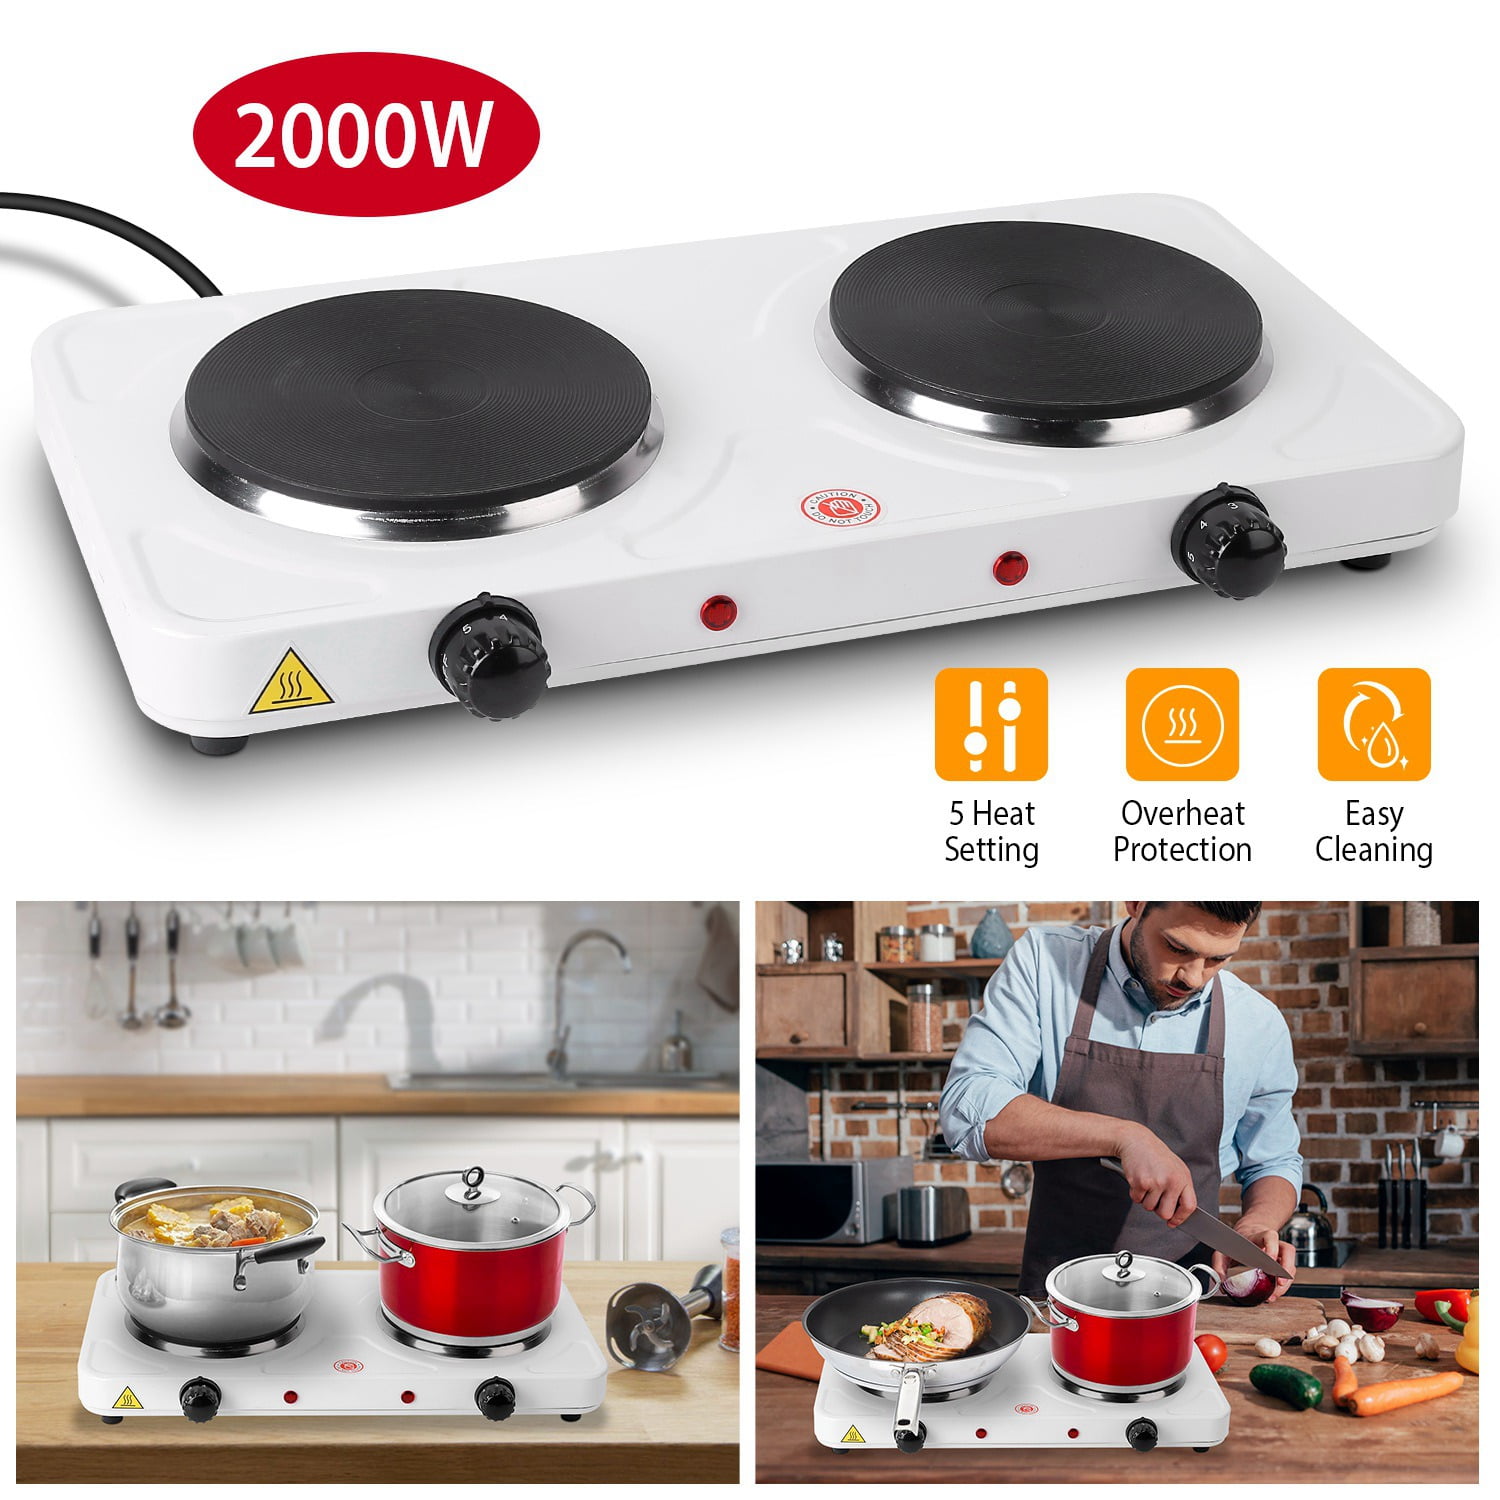 Duxtop Portable Induction Cooktop, Countertop Burner Induction Hot Plate with LCD Sensor Touch 1800 Watts, Black 9610ls